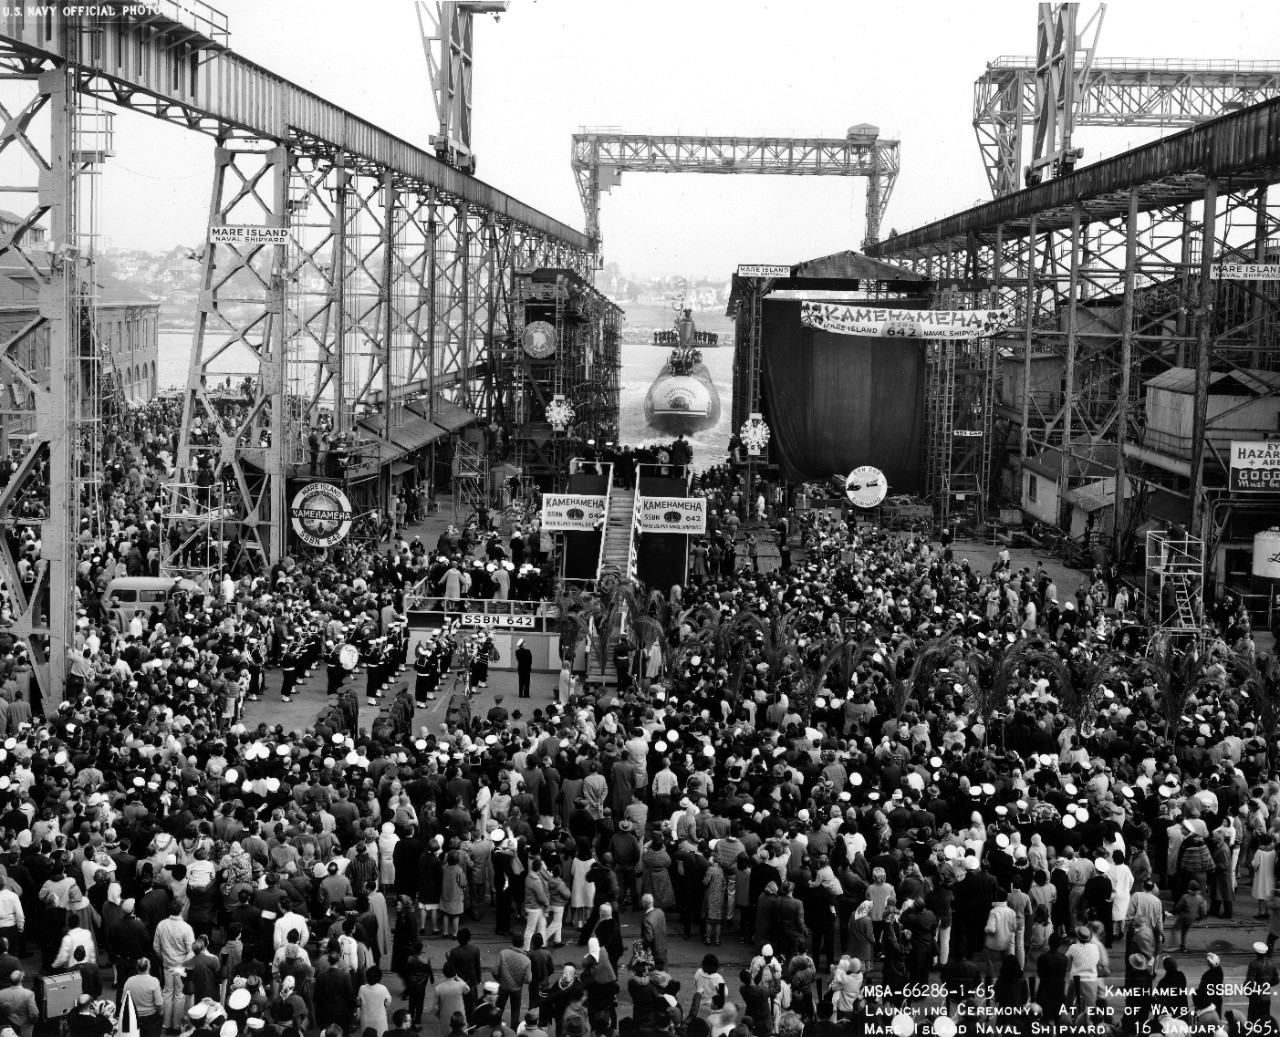 Launching ceremony of USS Kamehameha (SSBN-642) - at the end of ways at the Mare Island Naval Shipyard, January 16, 1965. 